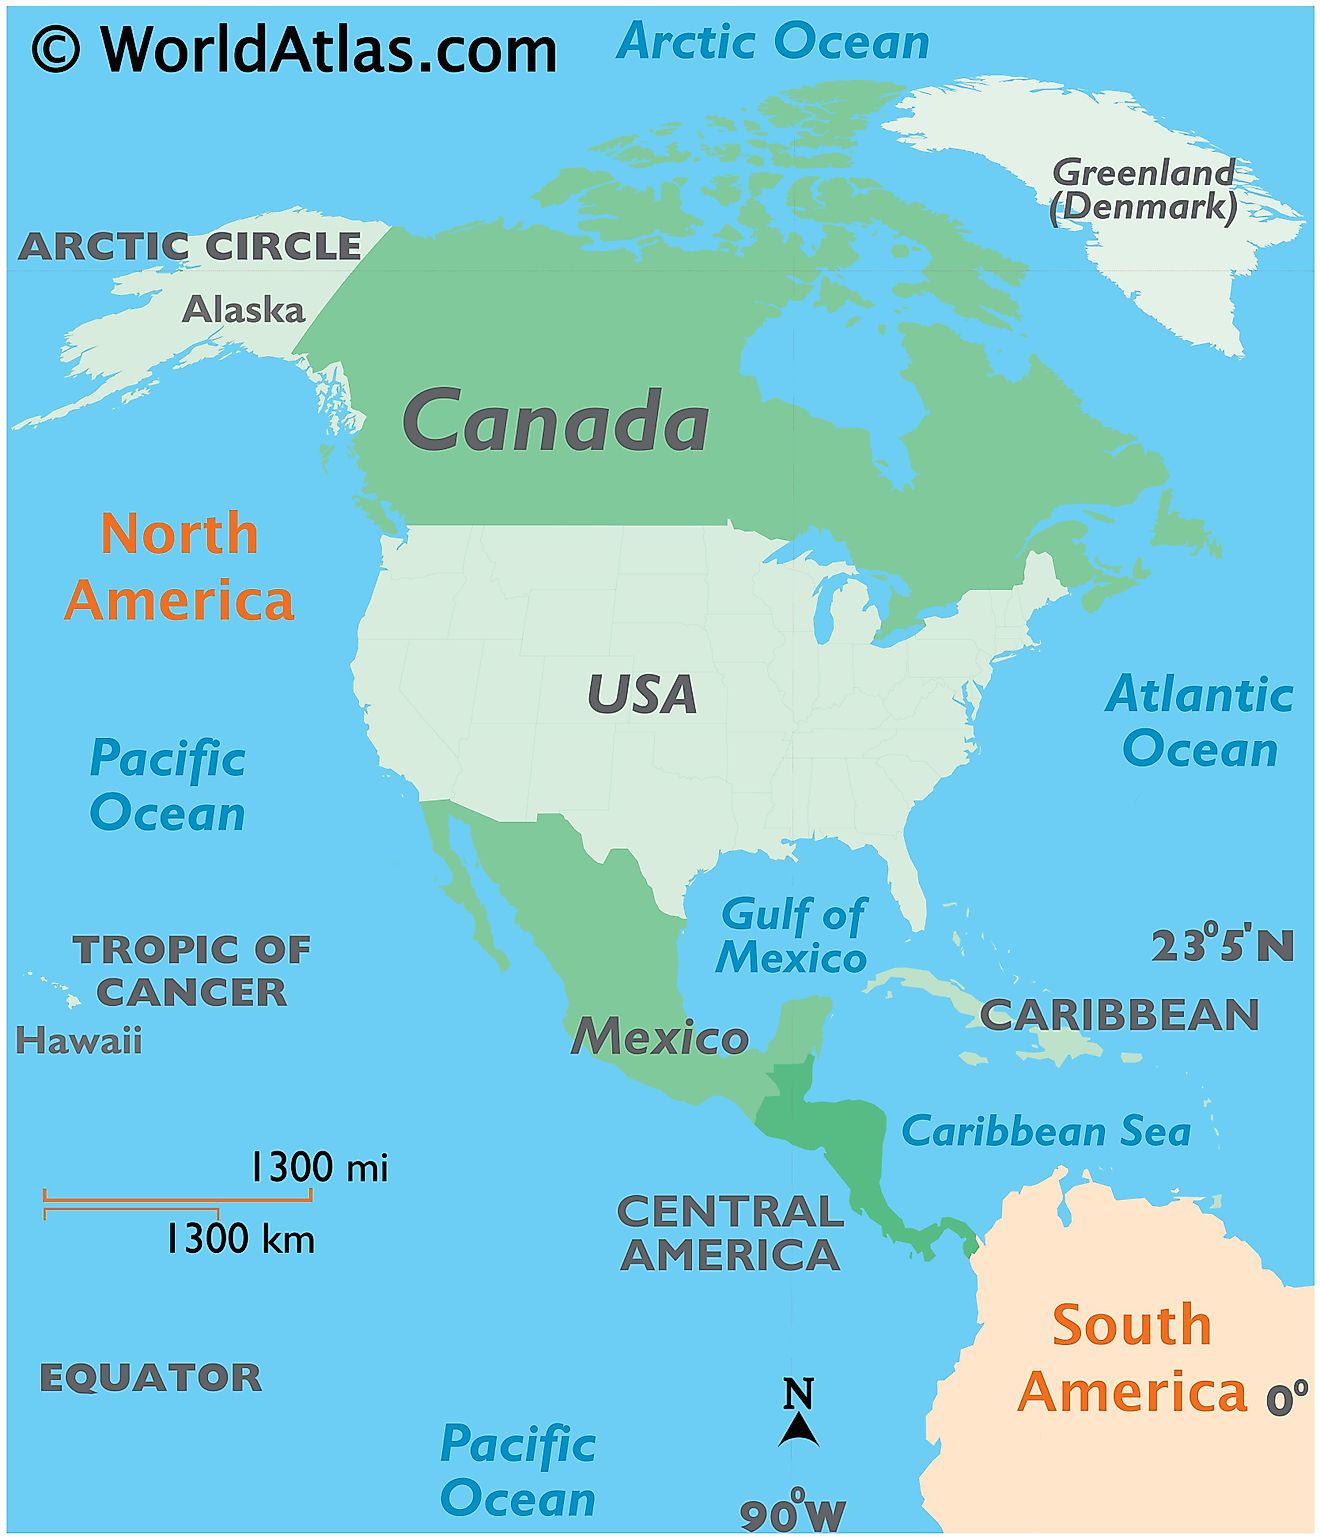 Large Map Of Canada Canada Maps & Facts - World Atlas